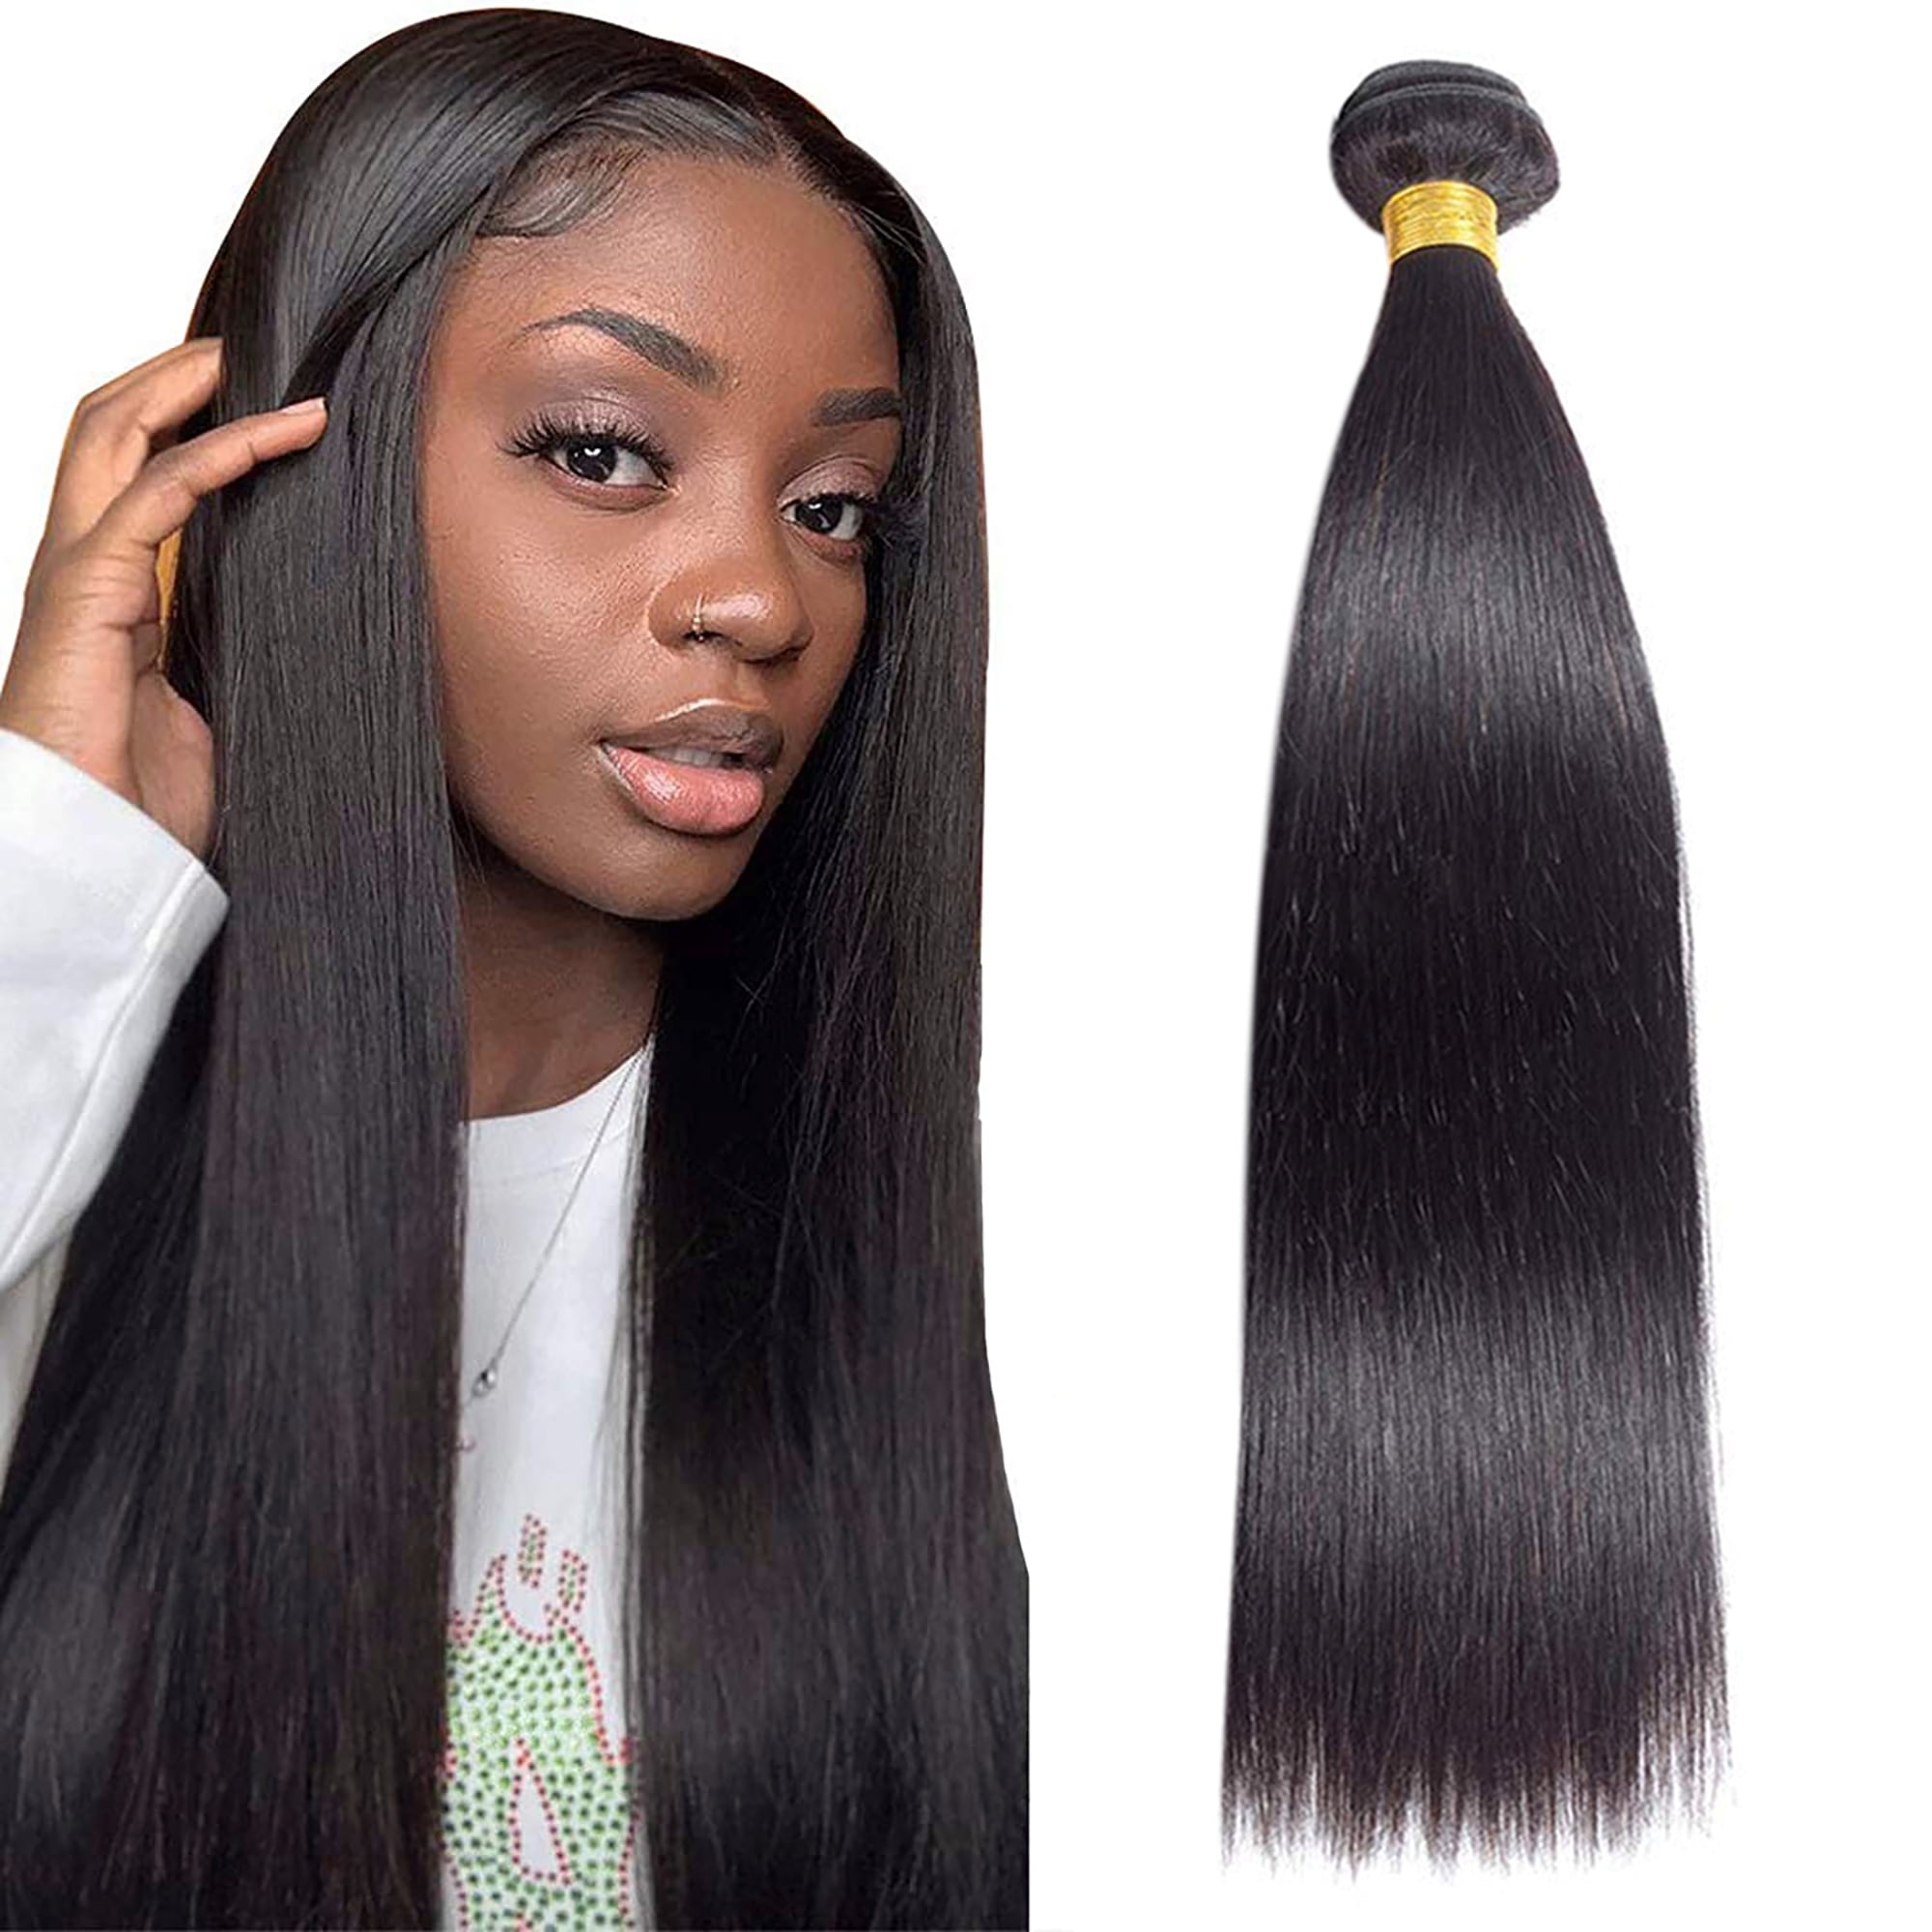 Straight Hair Weaves Online | Indique SEA Collection | Buy Now